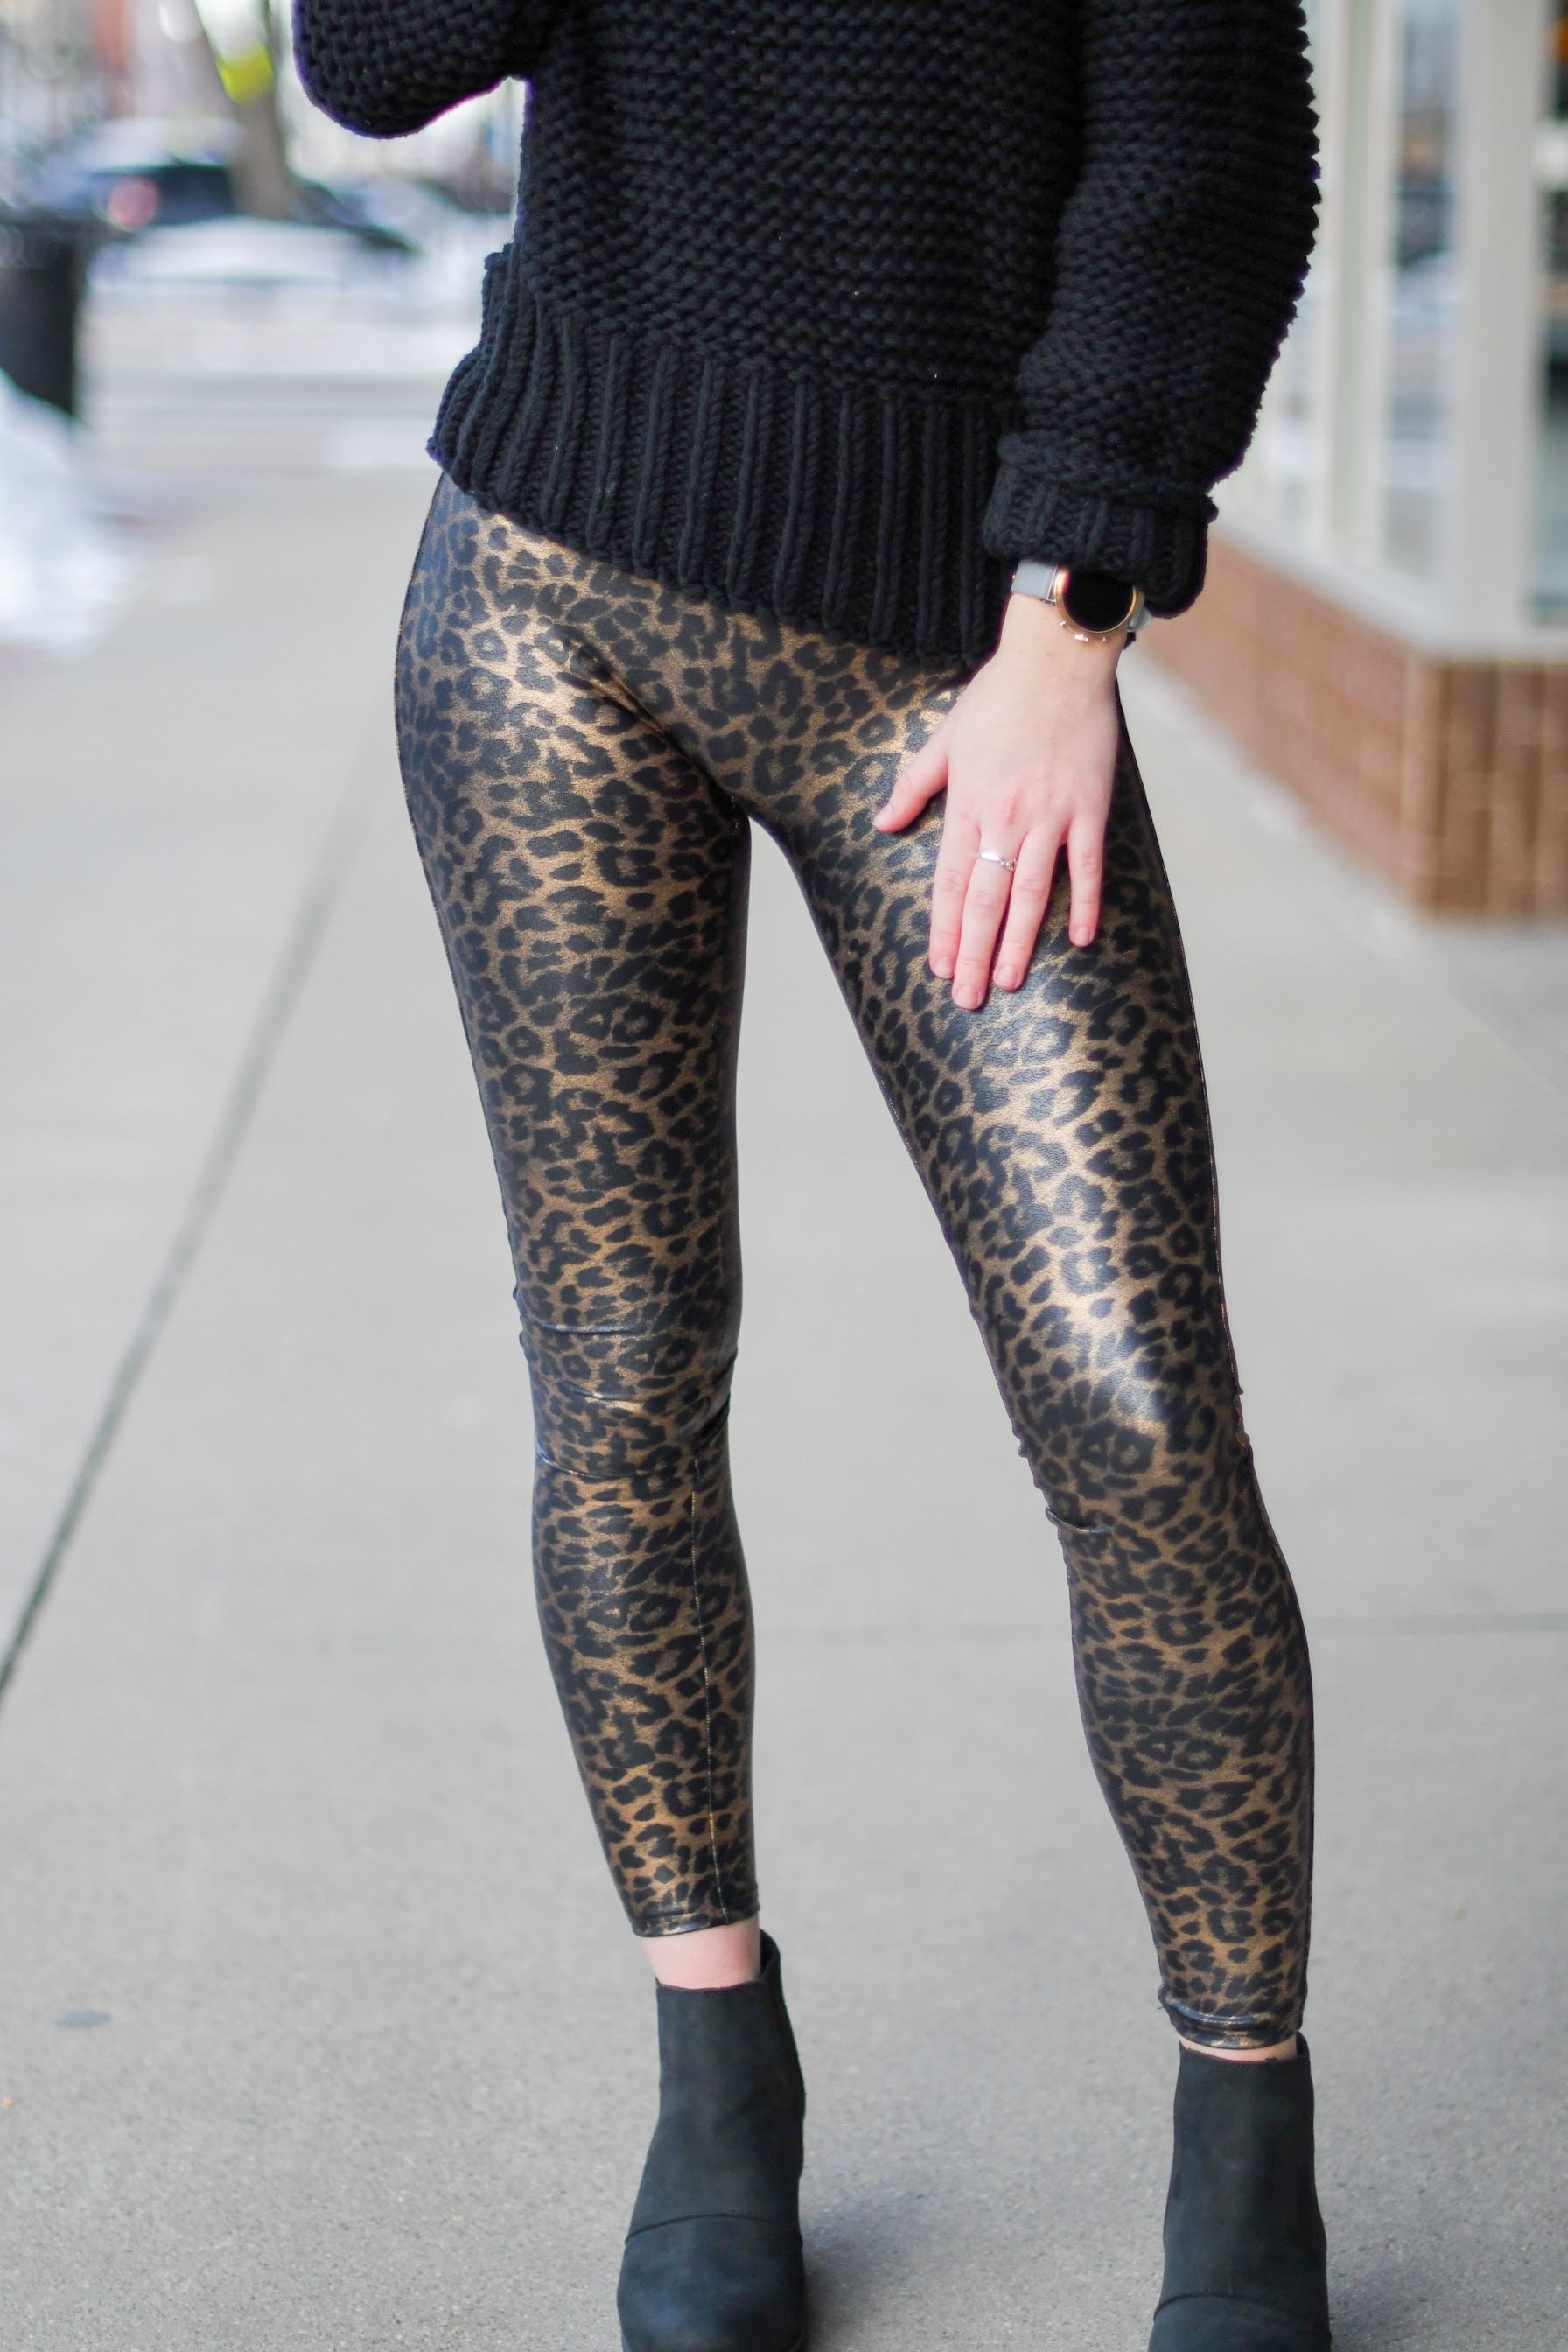 How to Wear Faux Leather Leggings | Stripes and Whimsy